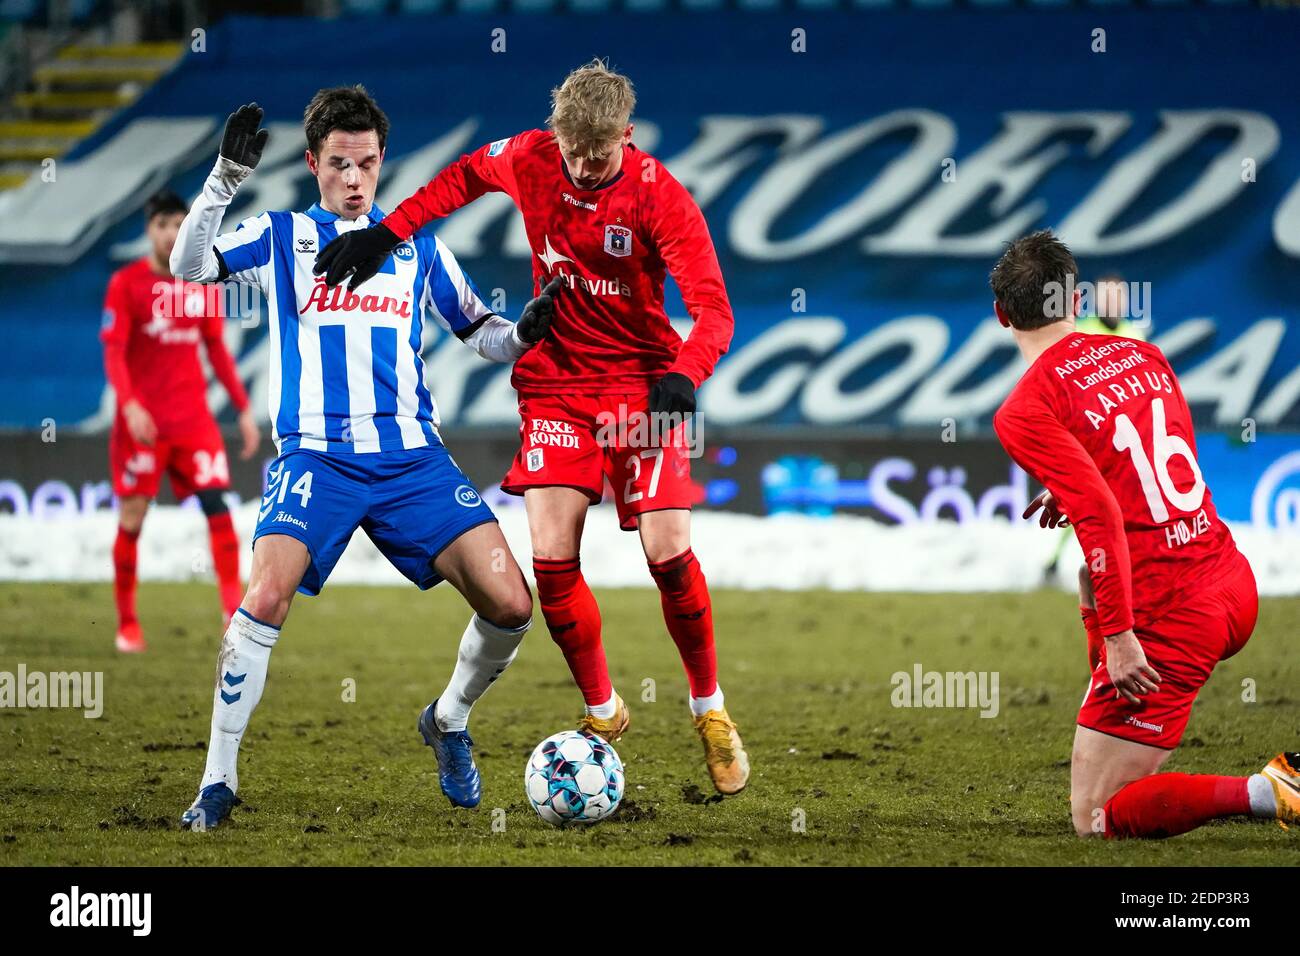 Odense, Denmark. 14th Feb, 2021. Albert Erlykke (27) of Aarhus GF and Jens Jakob Thomasen (14) of OB seen during the 3F Superliga match between Odense Boldklub and Aarhus GF at Nature Energy Park in Odense. (Photo Credit: Gonzales Photo/Alamy Live News Stock Photo